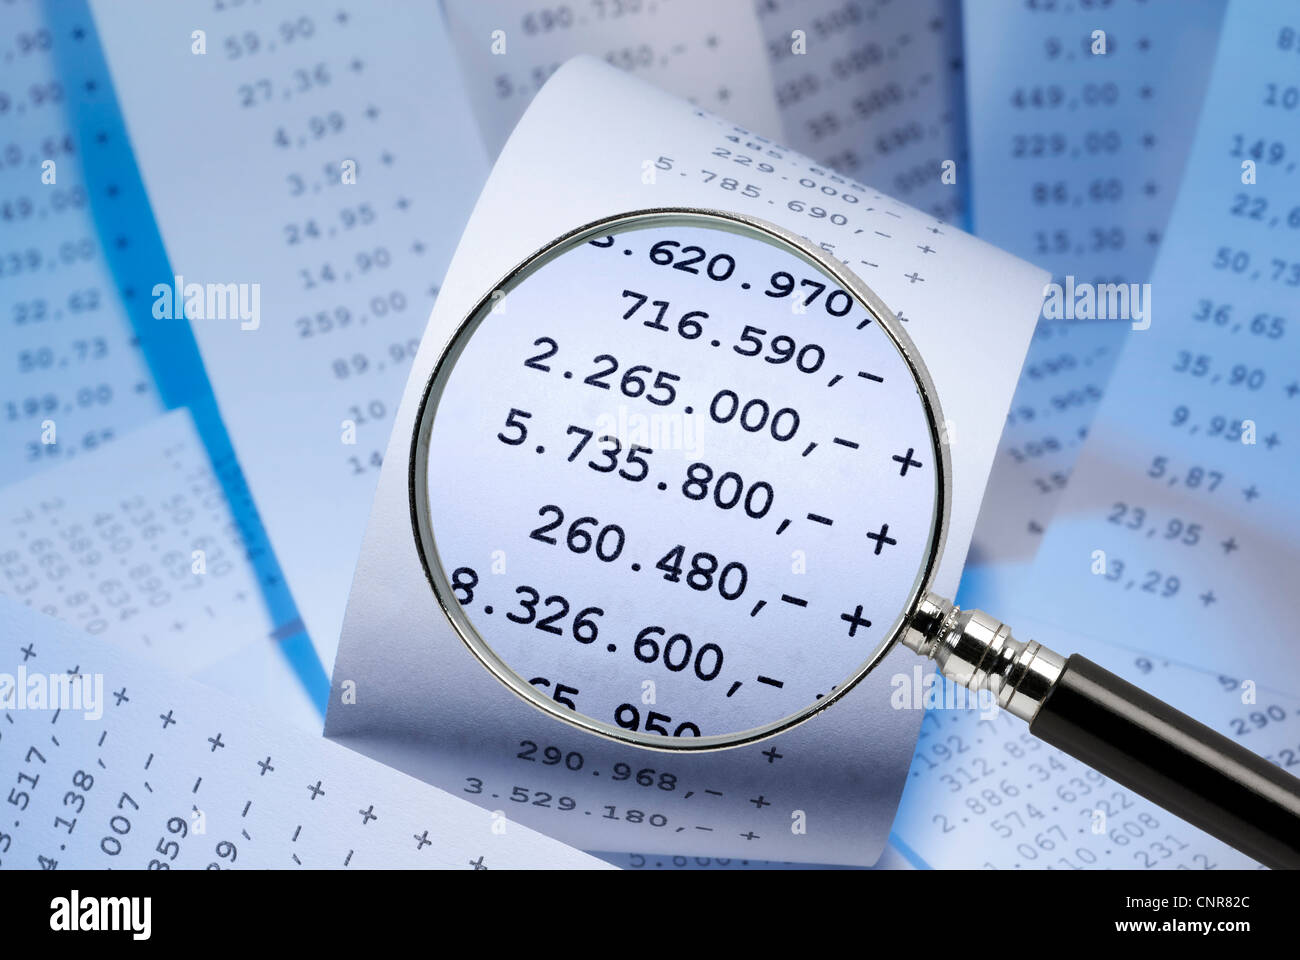 Magnifying glass focusing positive numbers on a receipt Stock Photo